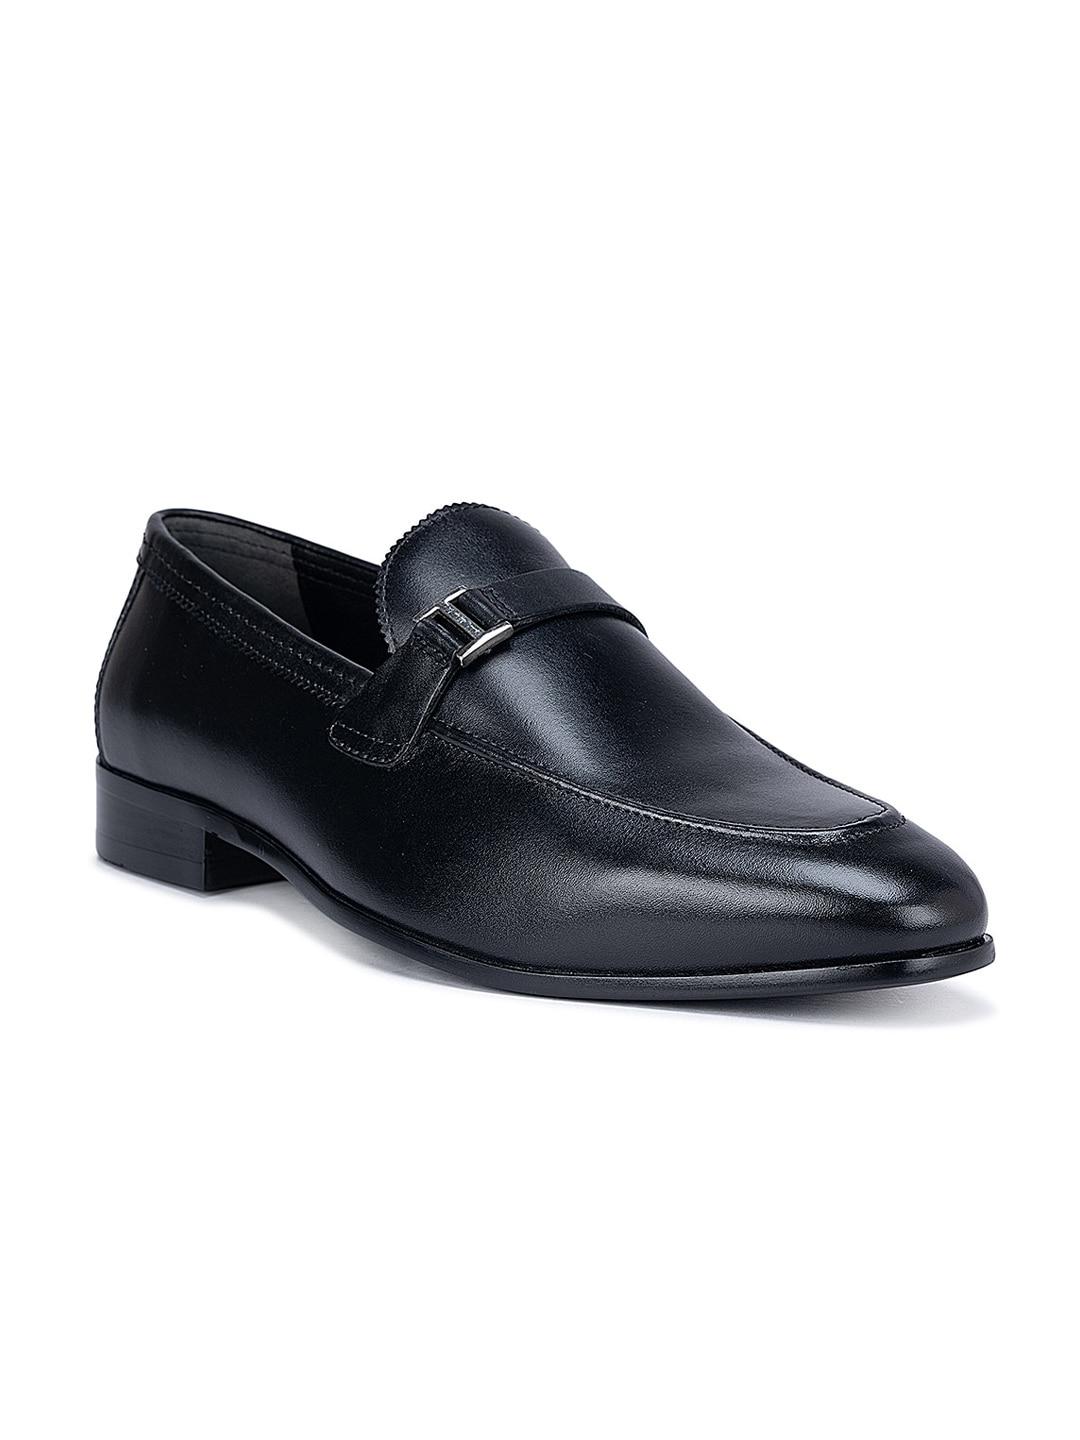 ROSSO BRUNELLO Men Textured Leather Formal Slip-On Shoes